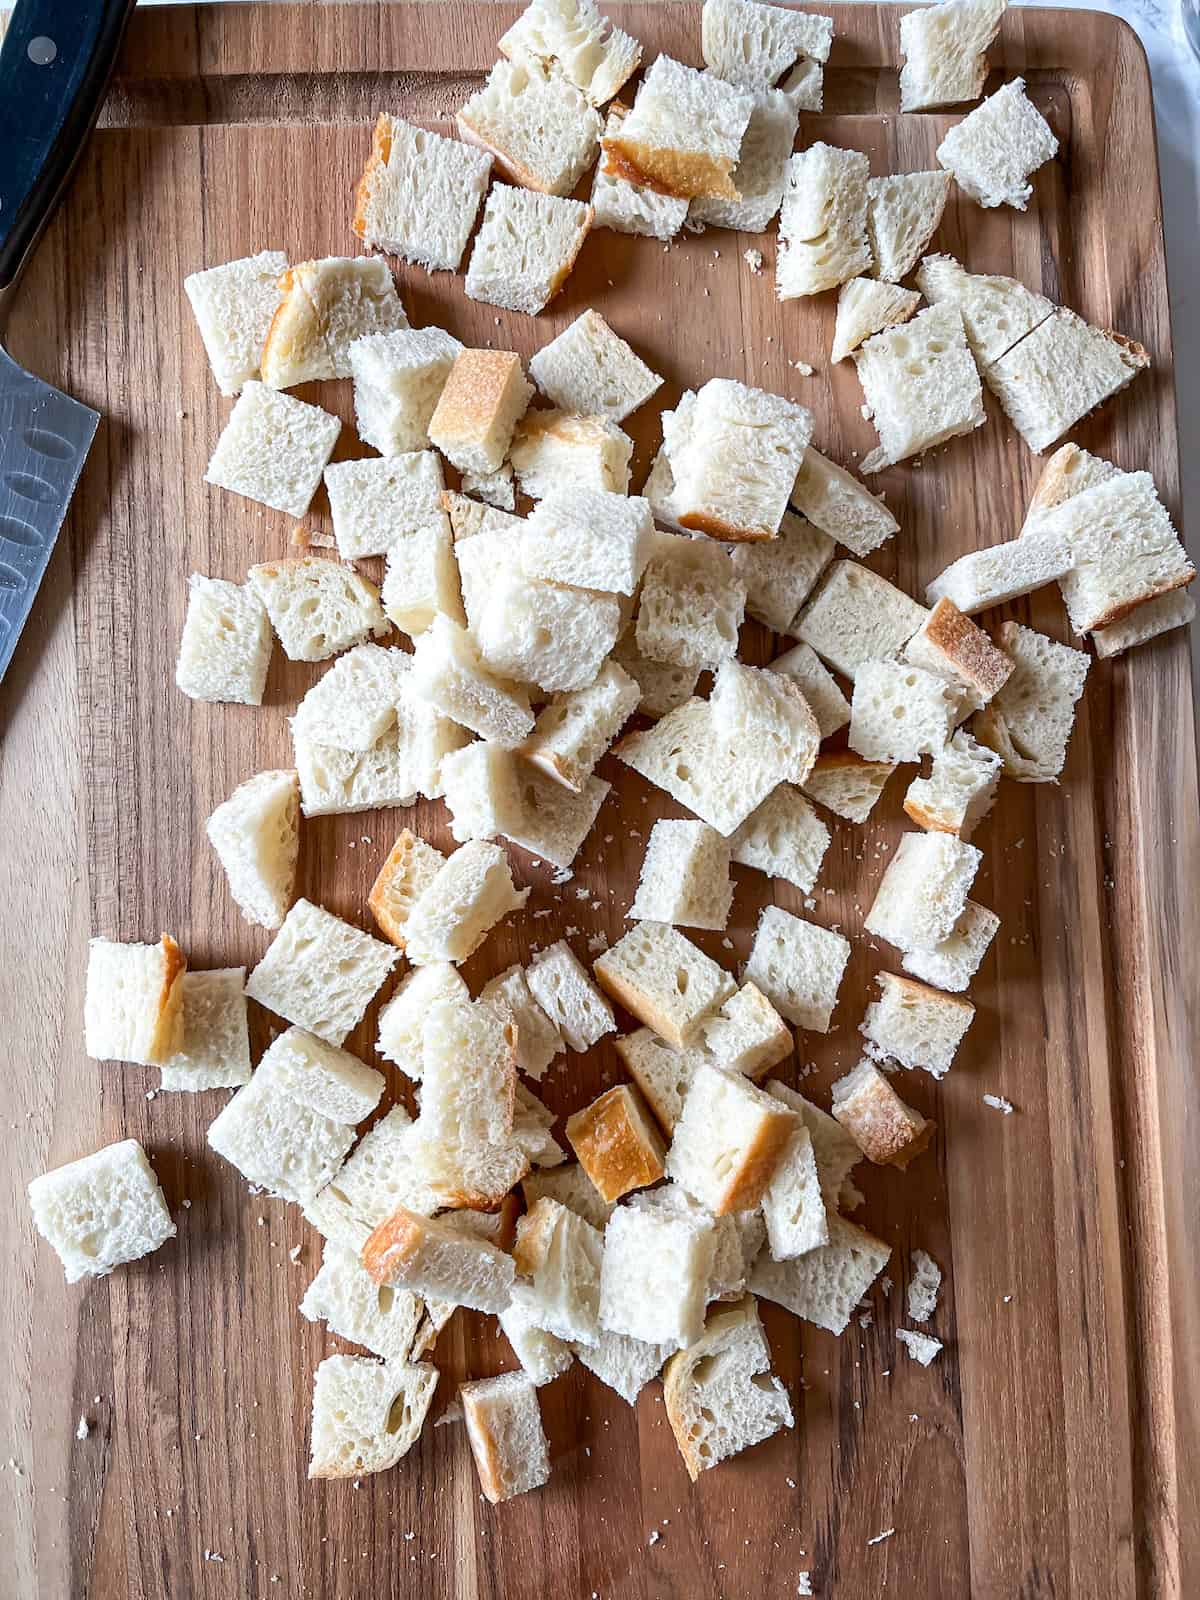 sourdough bread cubes on a wooden cutting board with a knife in the background